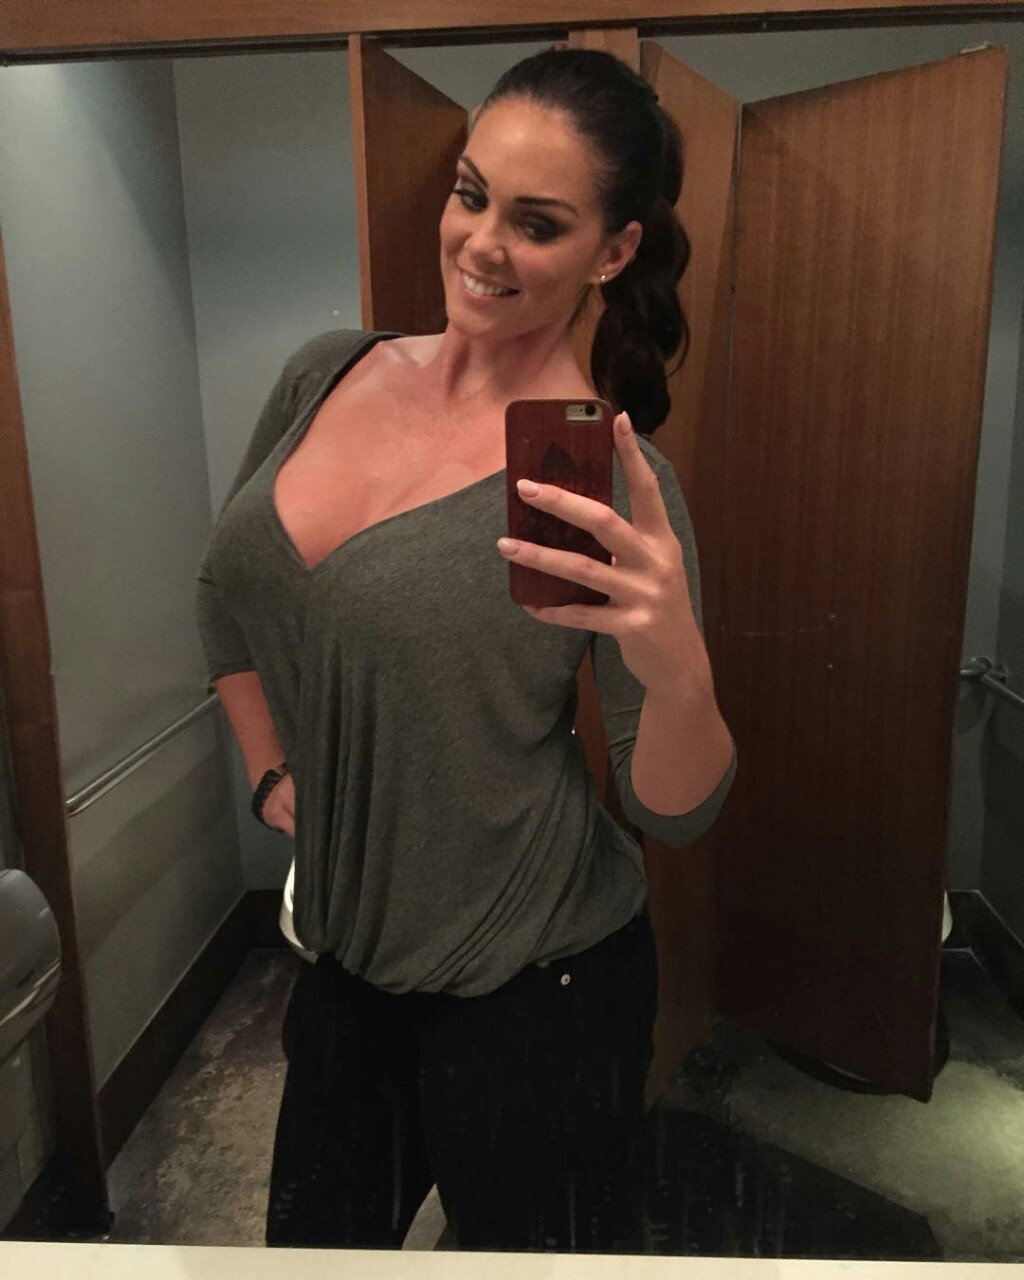 demosthenes-pebble:  Alison Tyler - Hottest adult star even when clothed